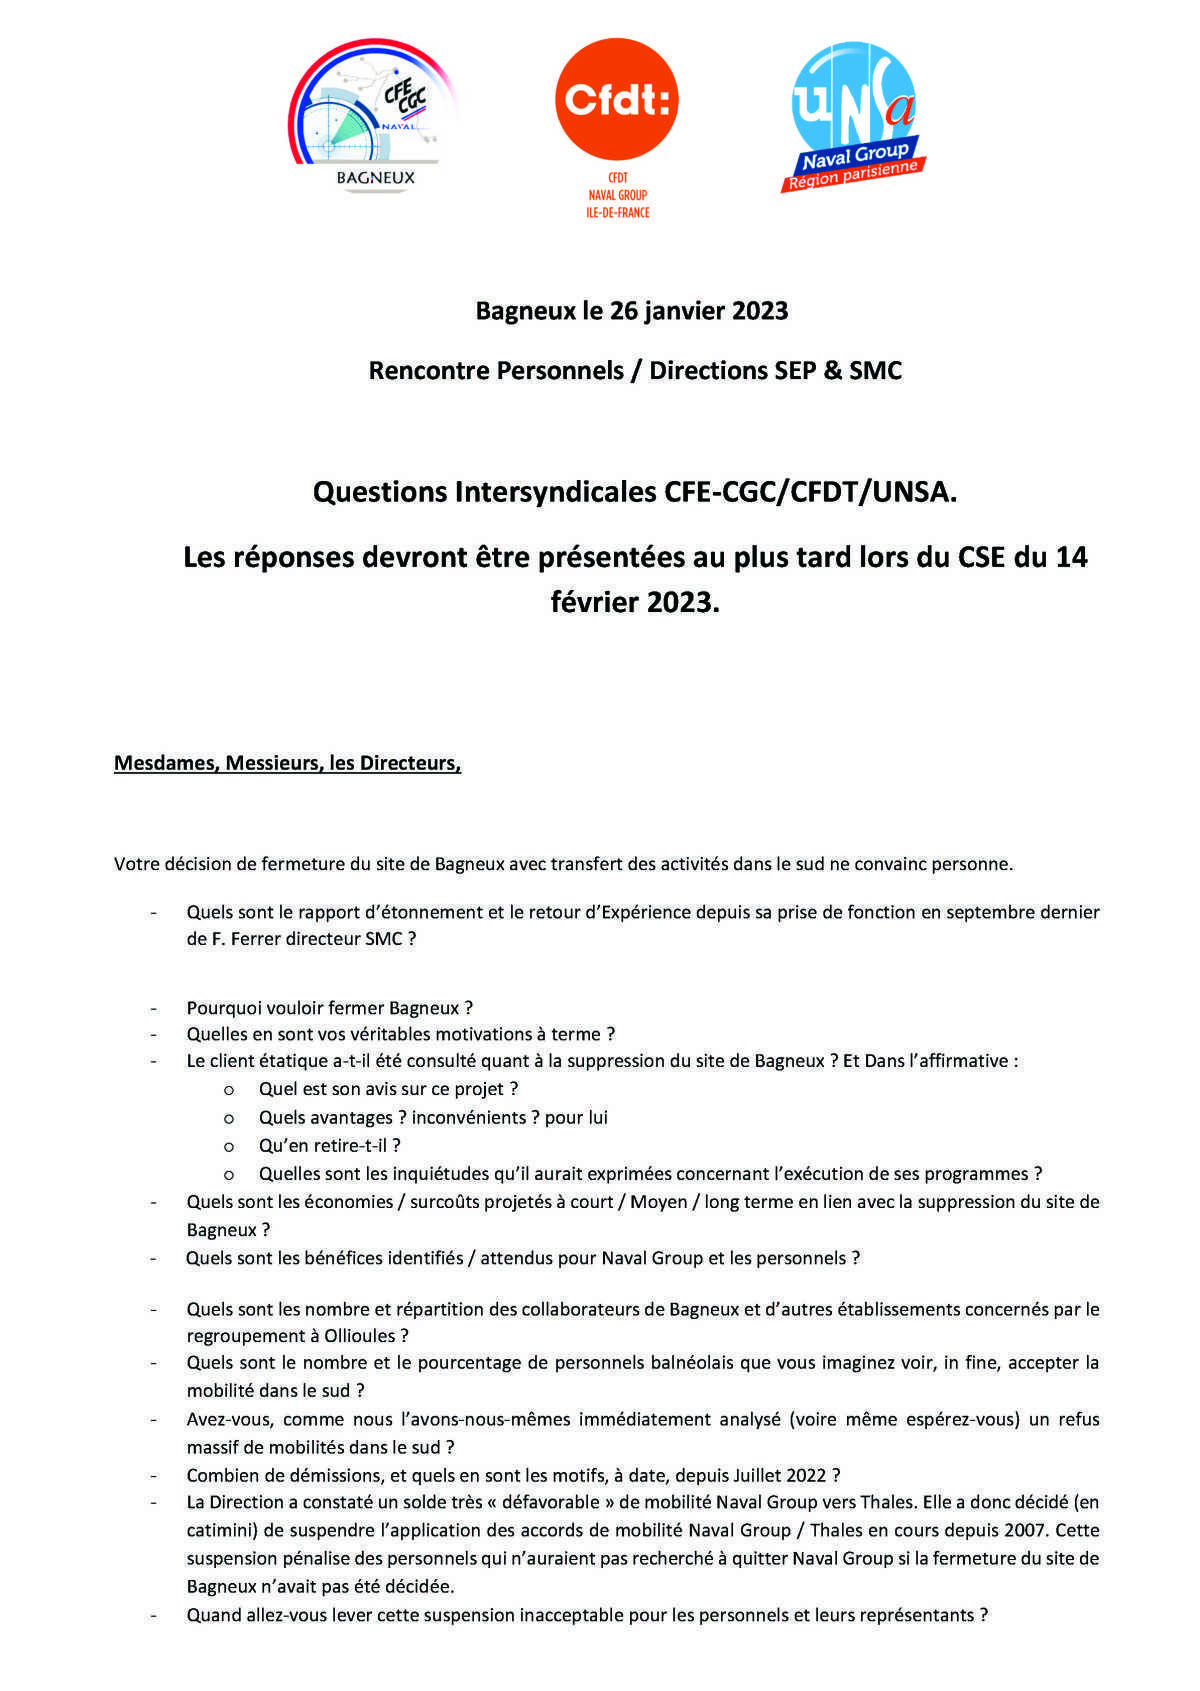 Questions Intersyndicales CFE-CGC/CFDT/UNSA - Janvier 2023